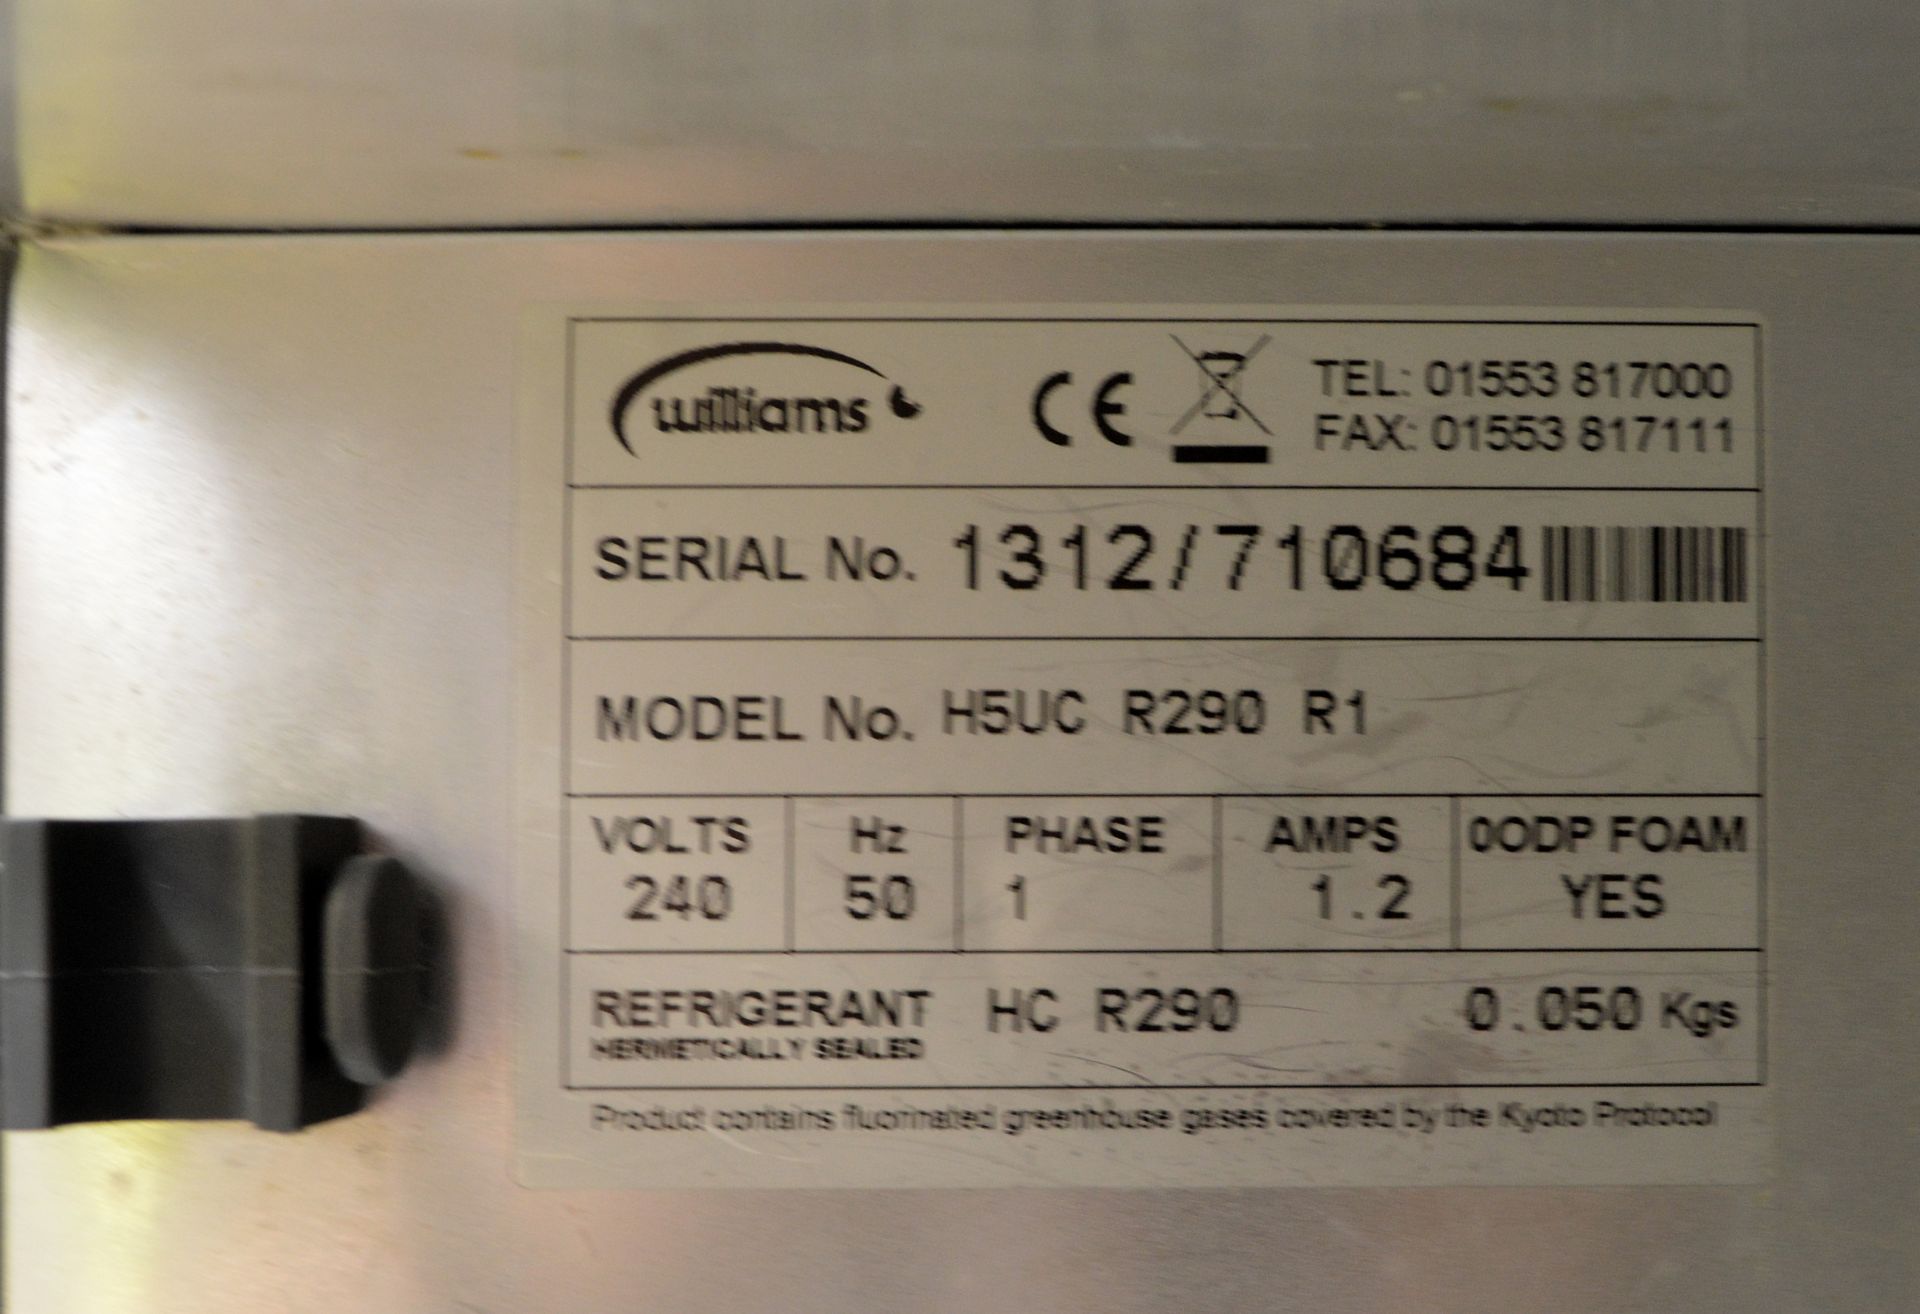 Williams H5UC R290 R1 Stainless Steel Undercounter Fridge, single phase electric - Image 5 of 8